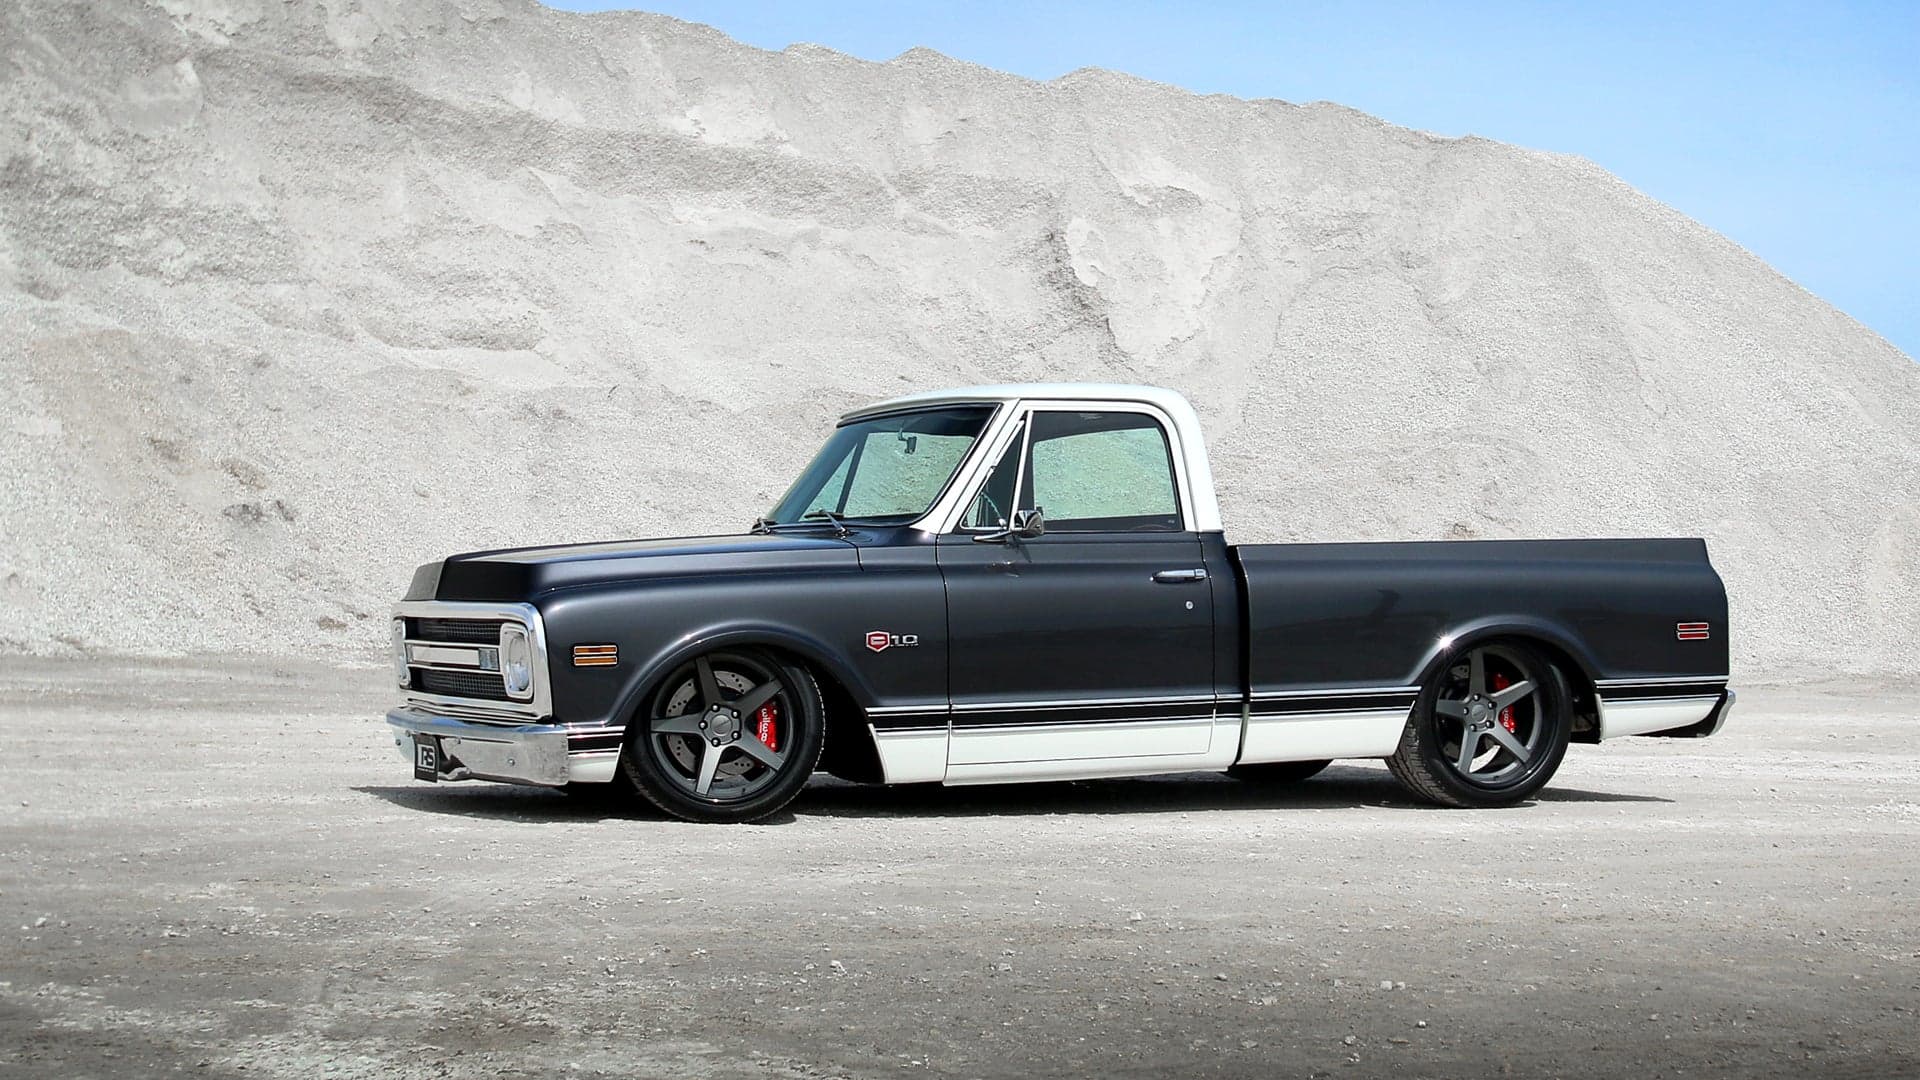 Second-Generation C-10 Truck Values Are On The Rise